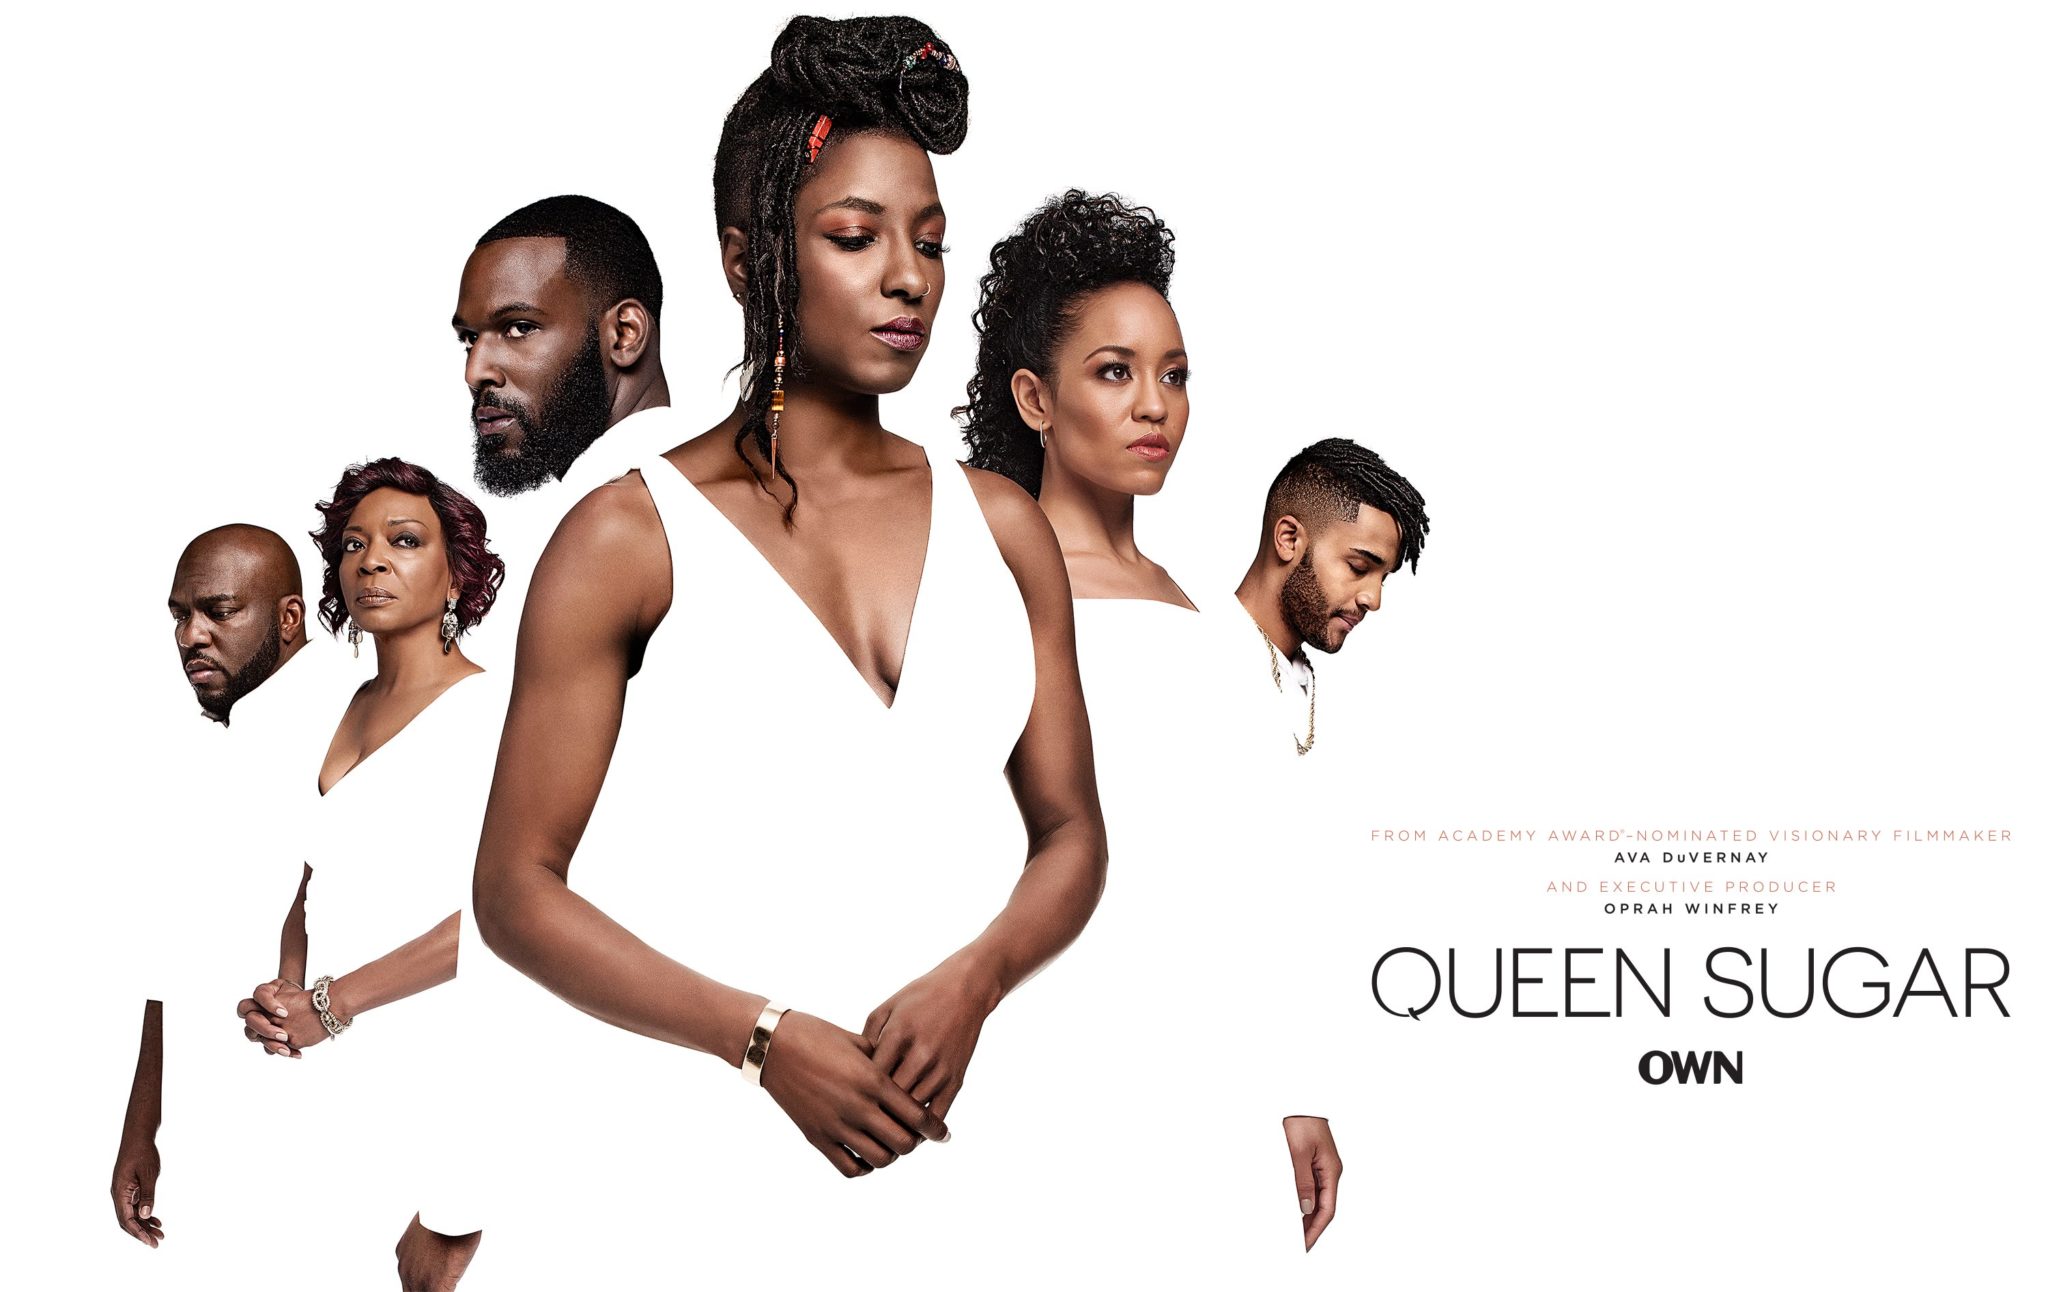 Queen Sugar Complete Seasons 2, 3 and 4 (2019) on DVD - iOffer Movies